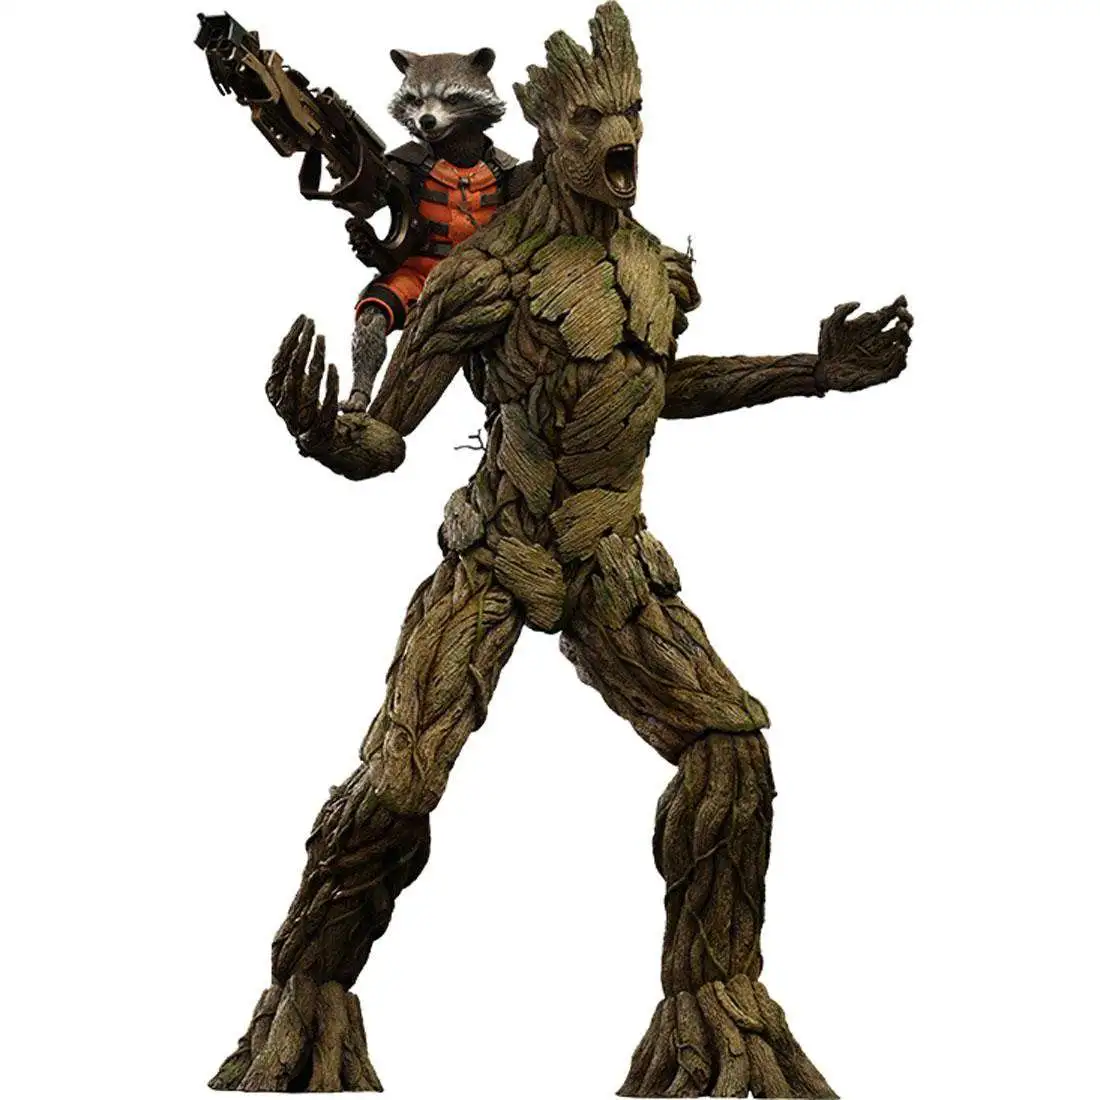 groot guardians of the galaxy movie